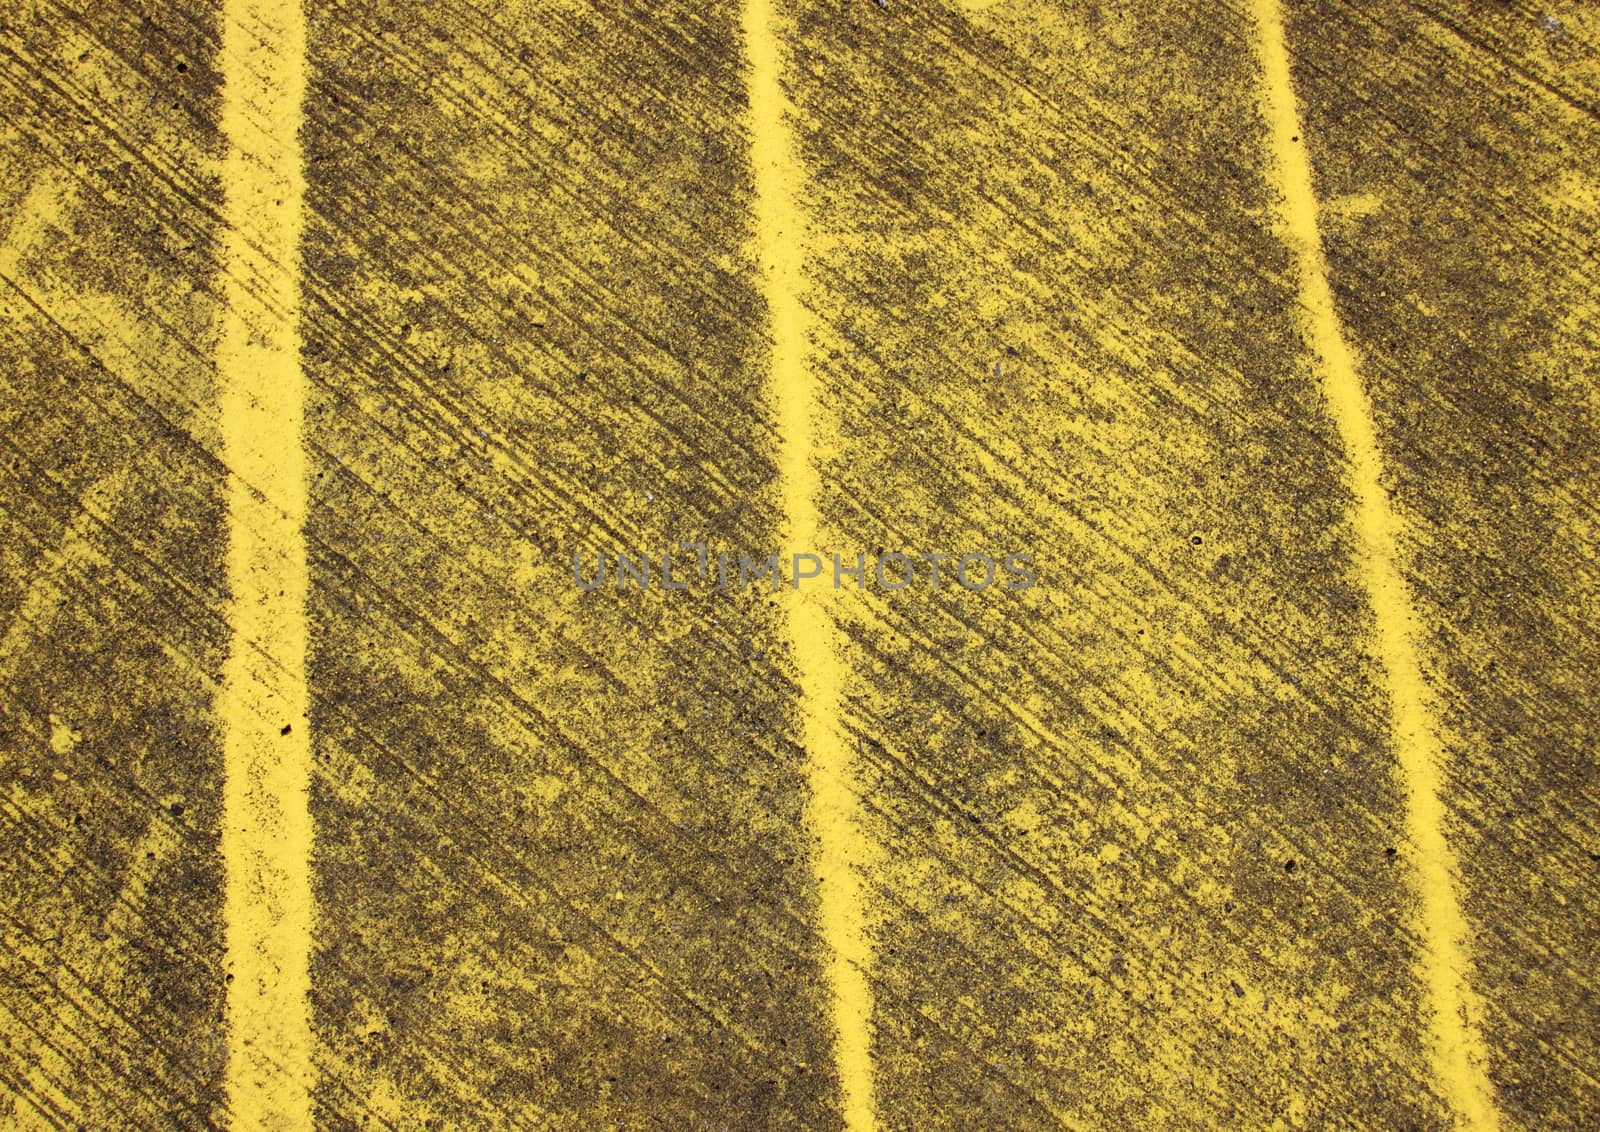 Pattern with yellow stripes painted on asphalt